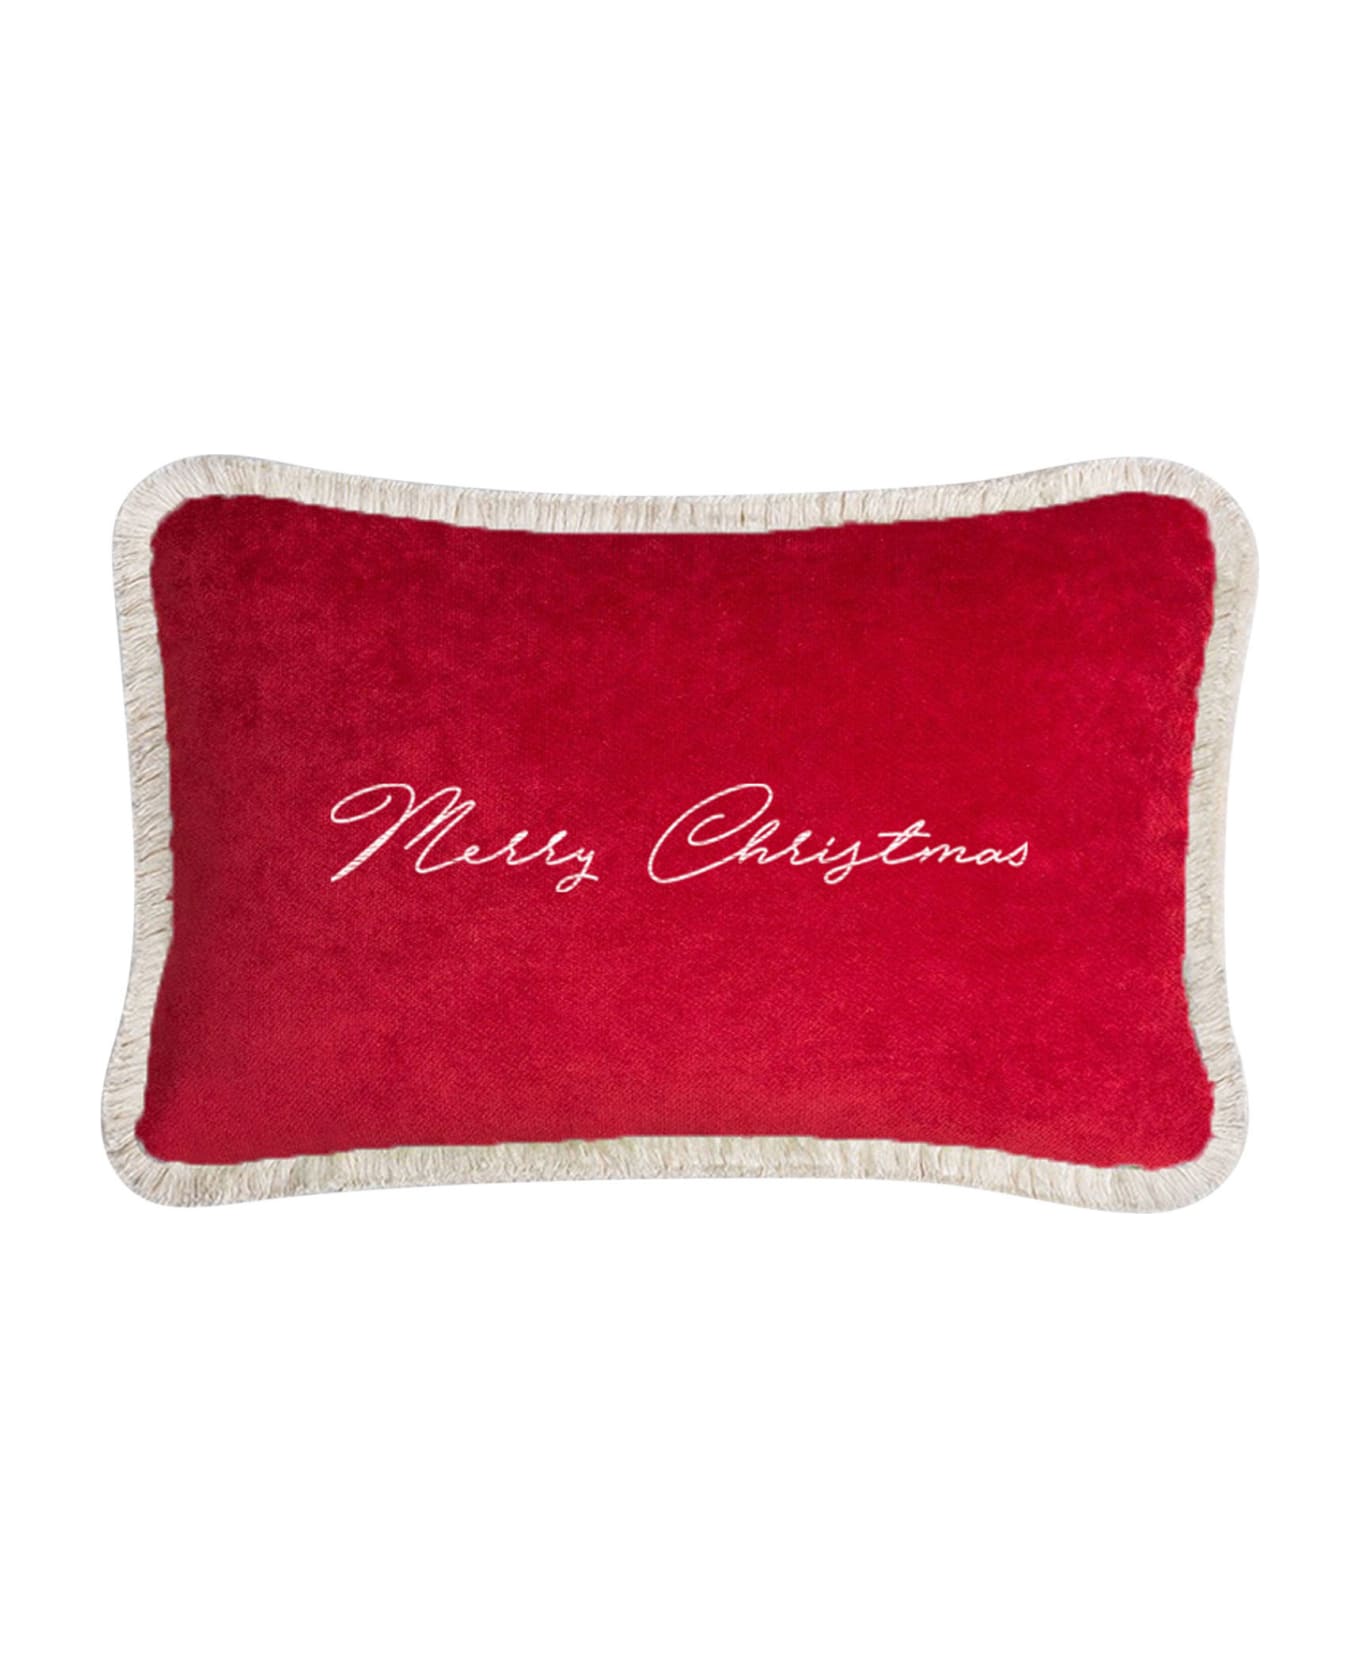 Lo Decor Happy Pillow Merry Christmas - red / white クッション